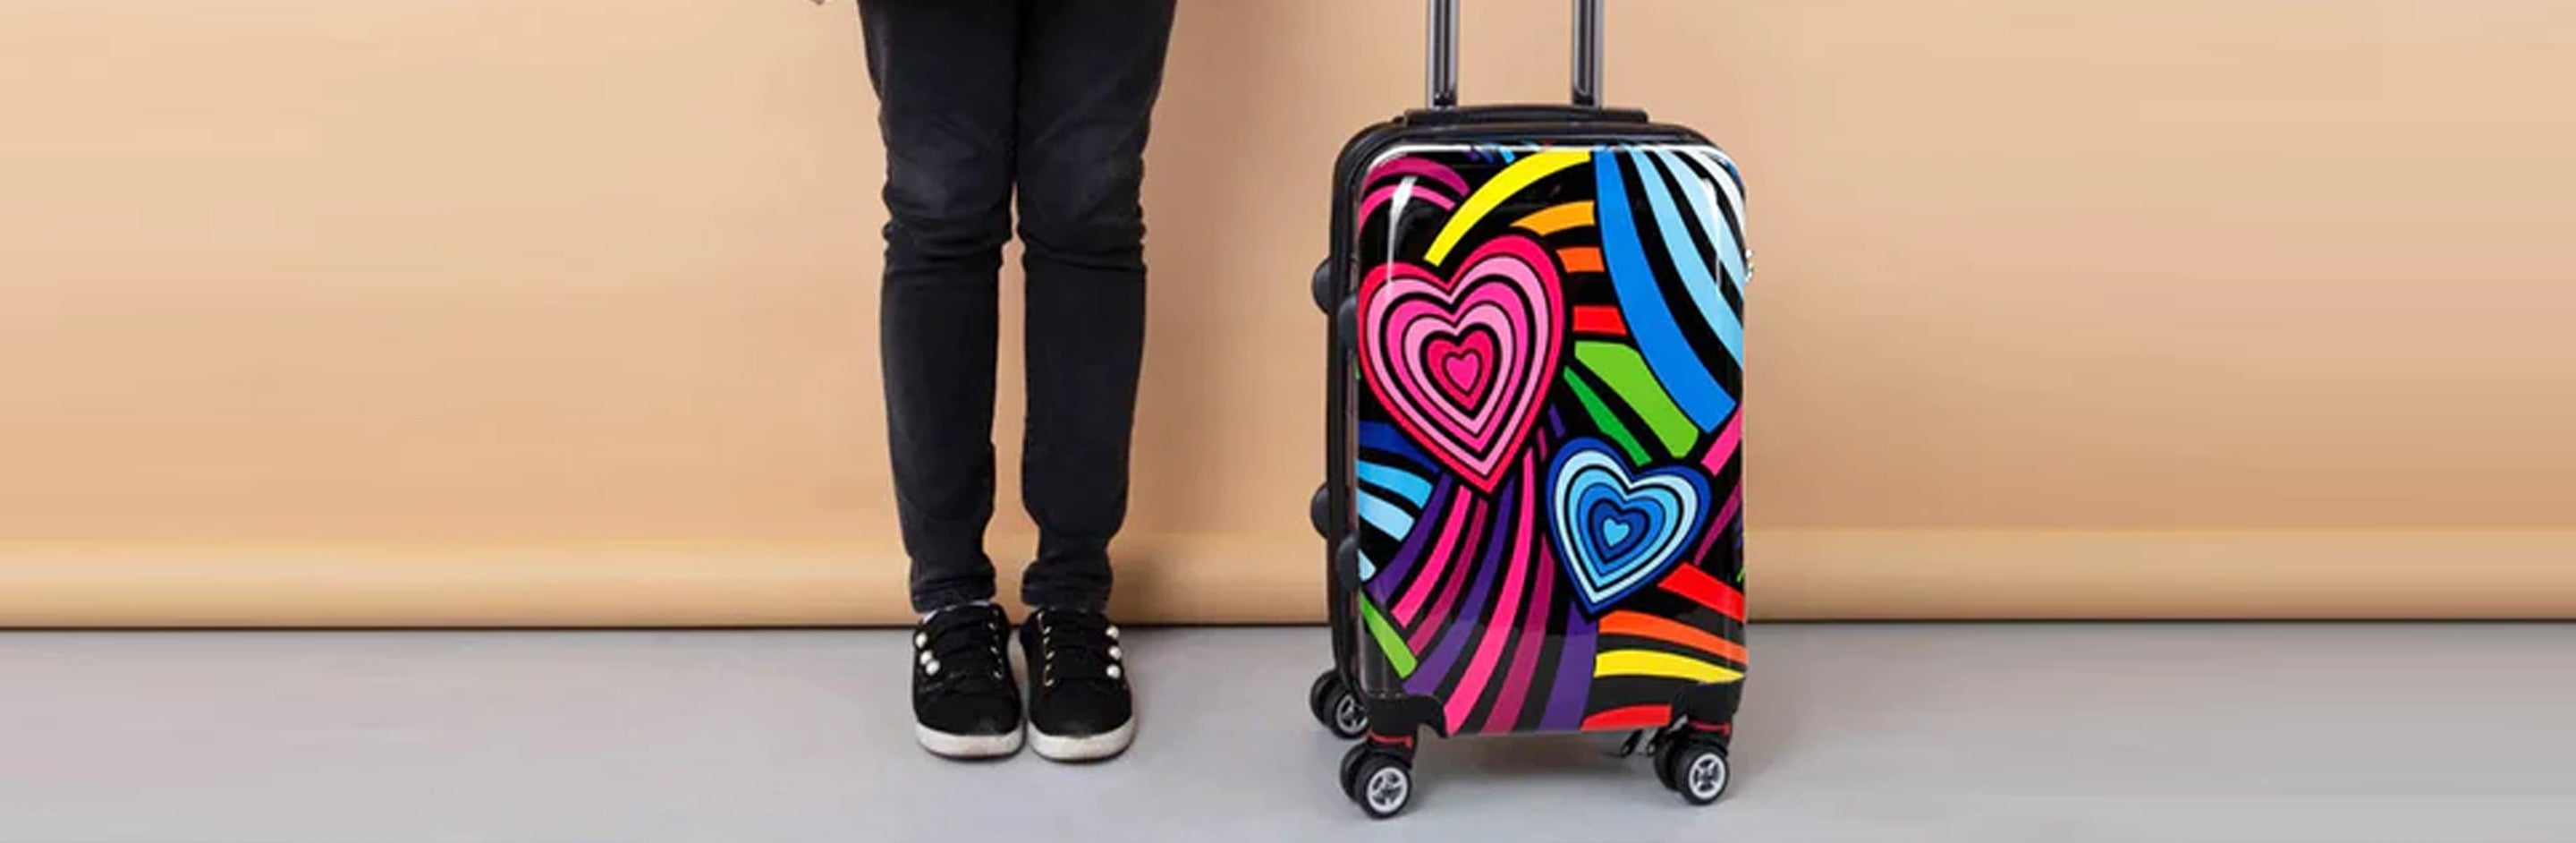 Printed Suitcases - Upperclass Fashions 